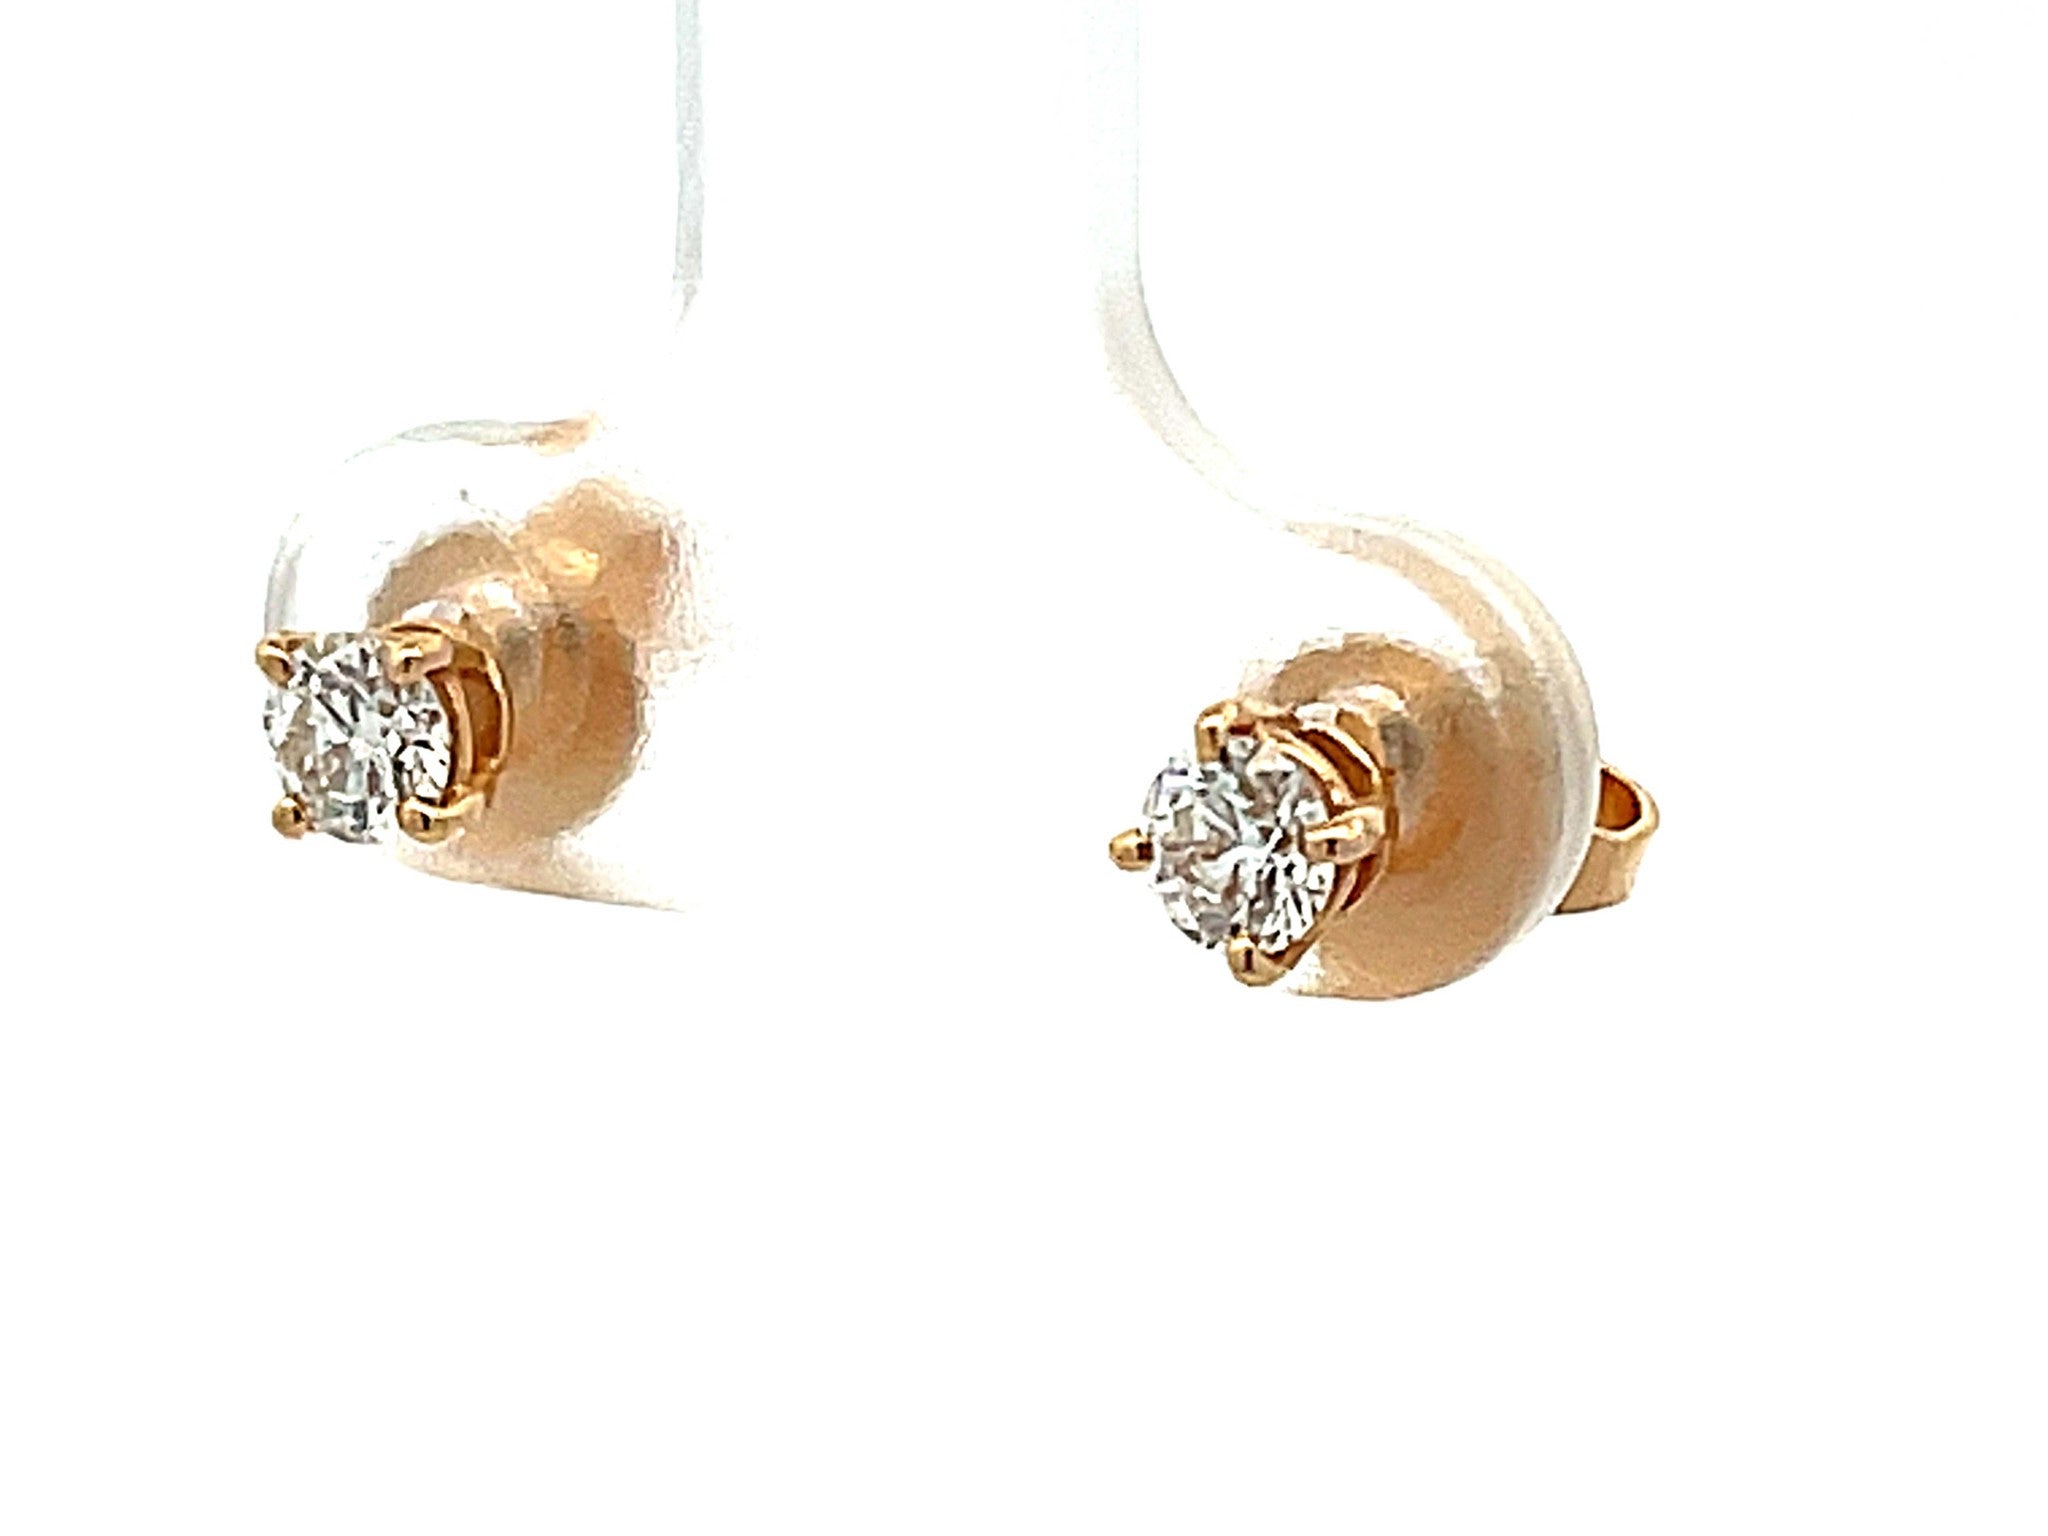 Tiffany Solitaire Diamond Stud Earrings in 18k Yellow Gold 0.34 ct